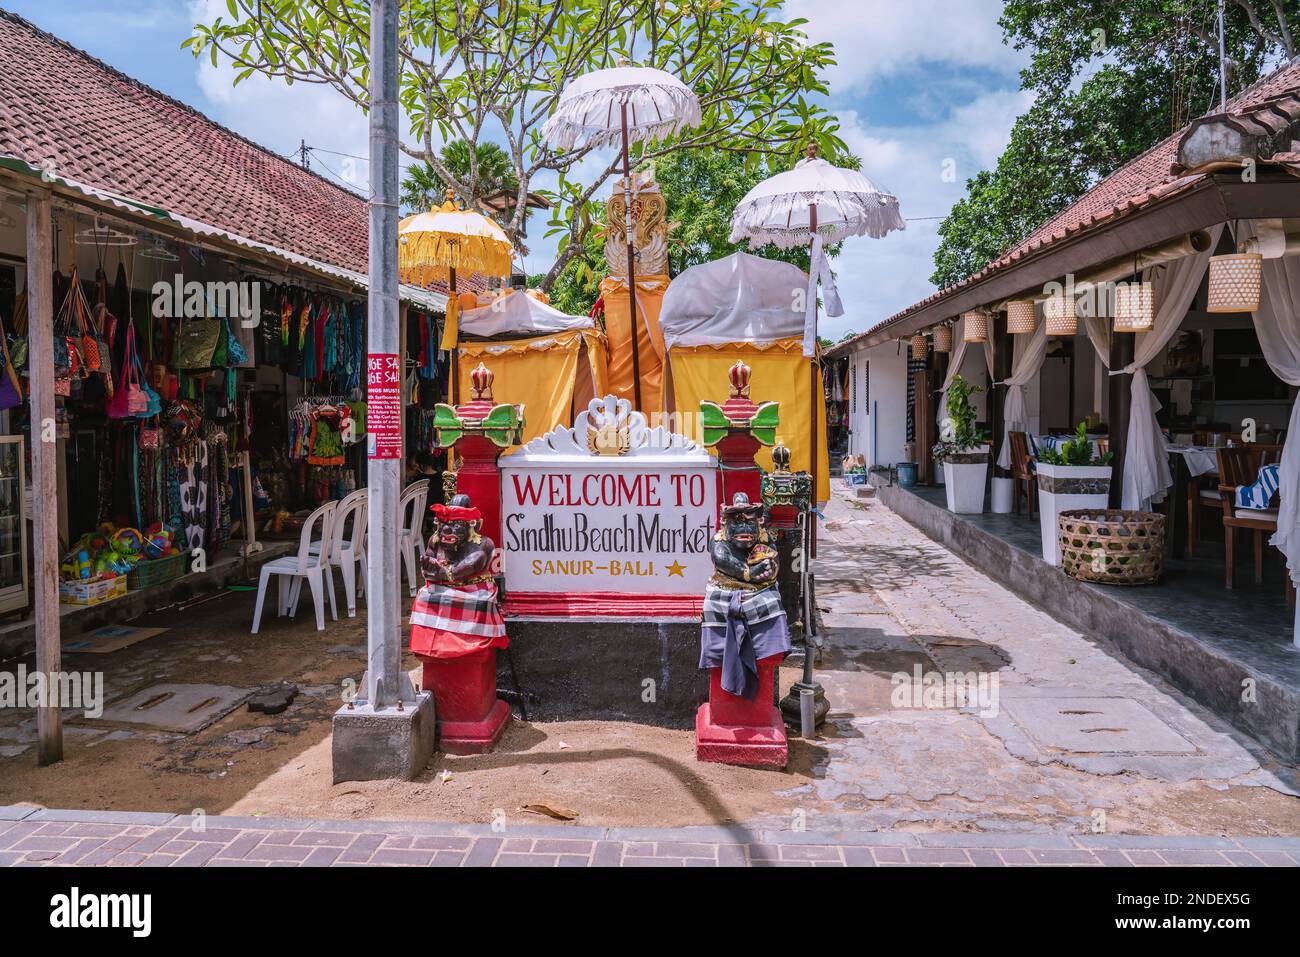 Welcome to Sindhu beach market at Sanur Bali message at entry point, greeting decorated by two demon guard statues in Balinese traditional style Stock Photo